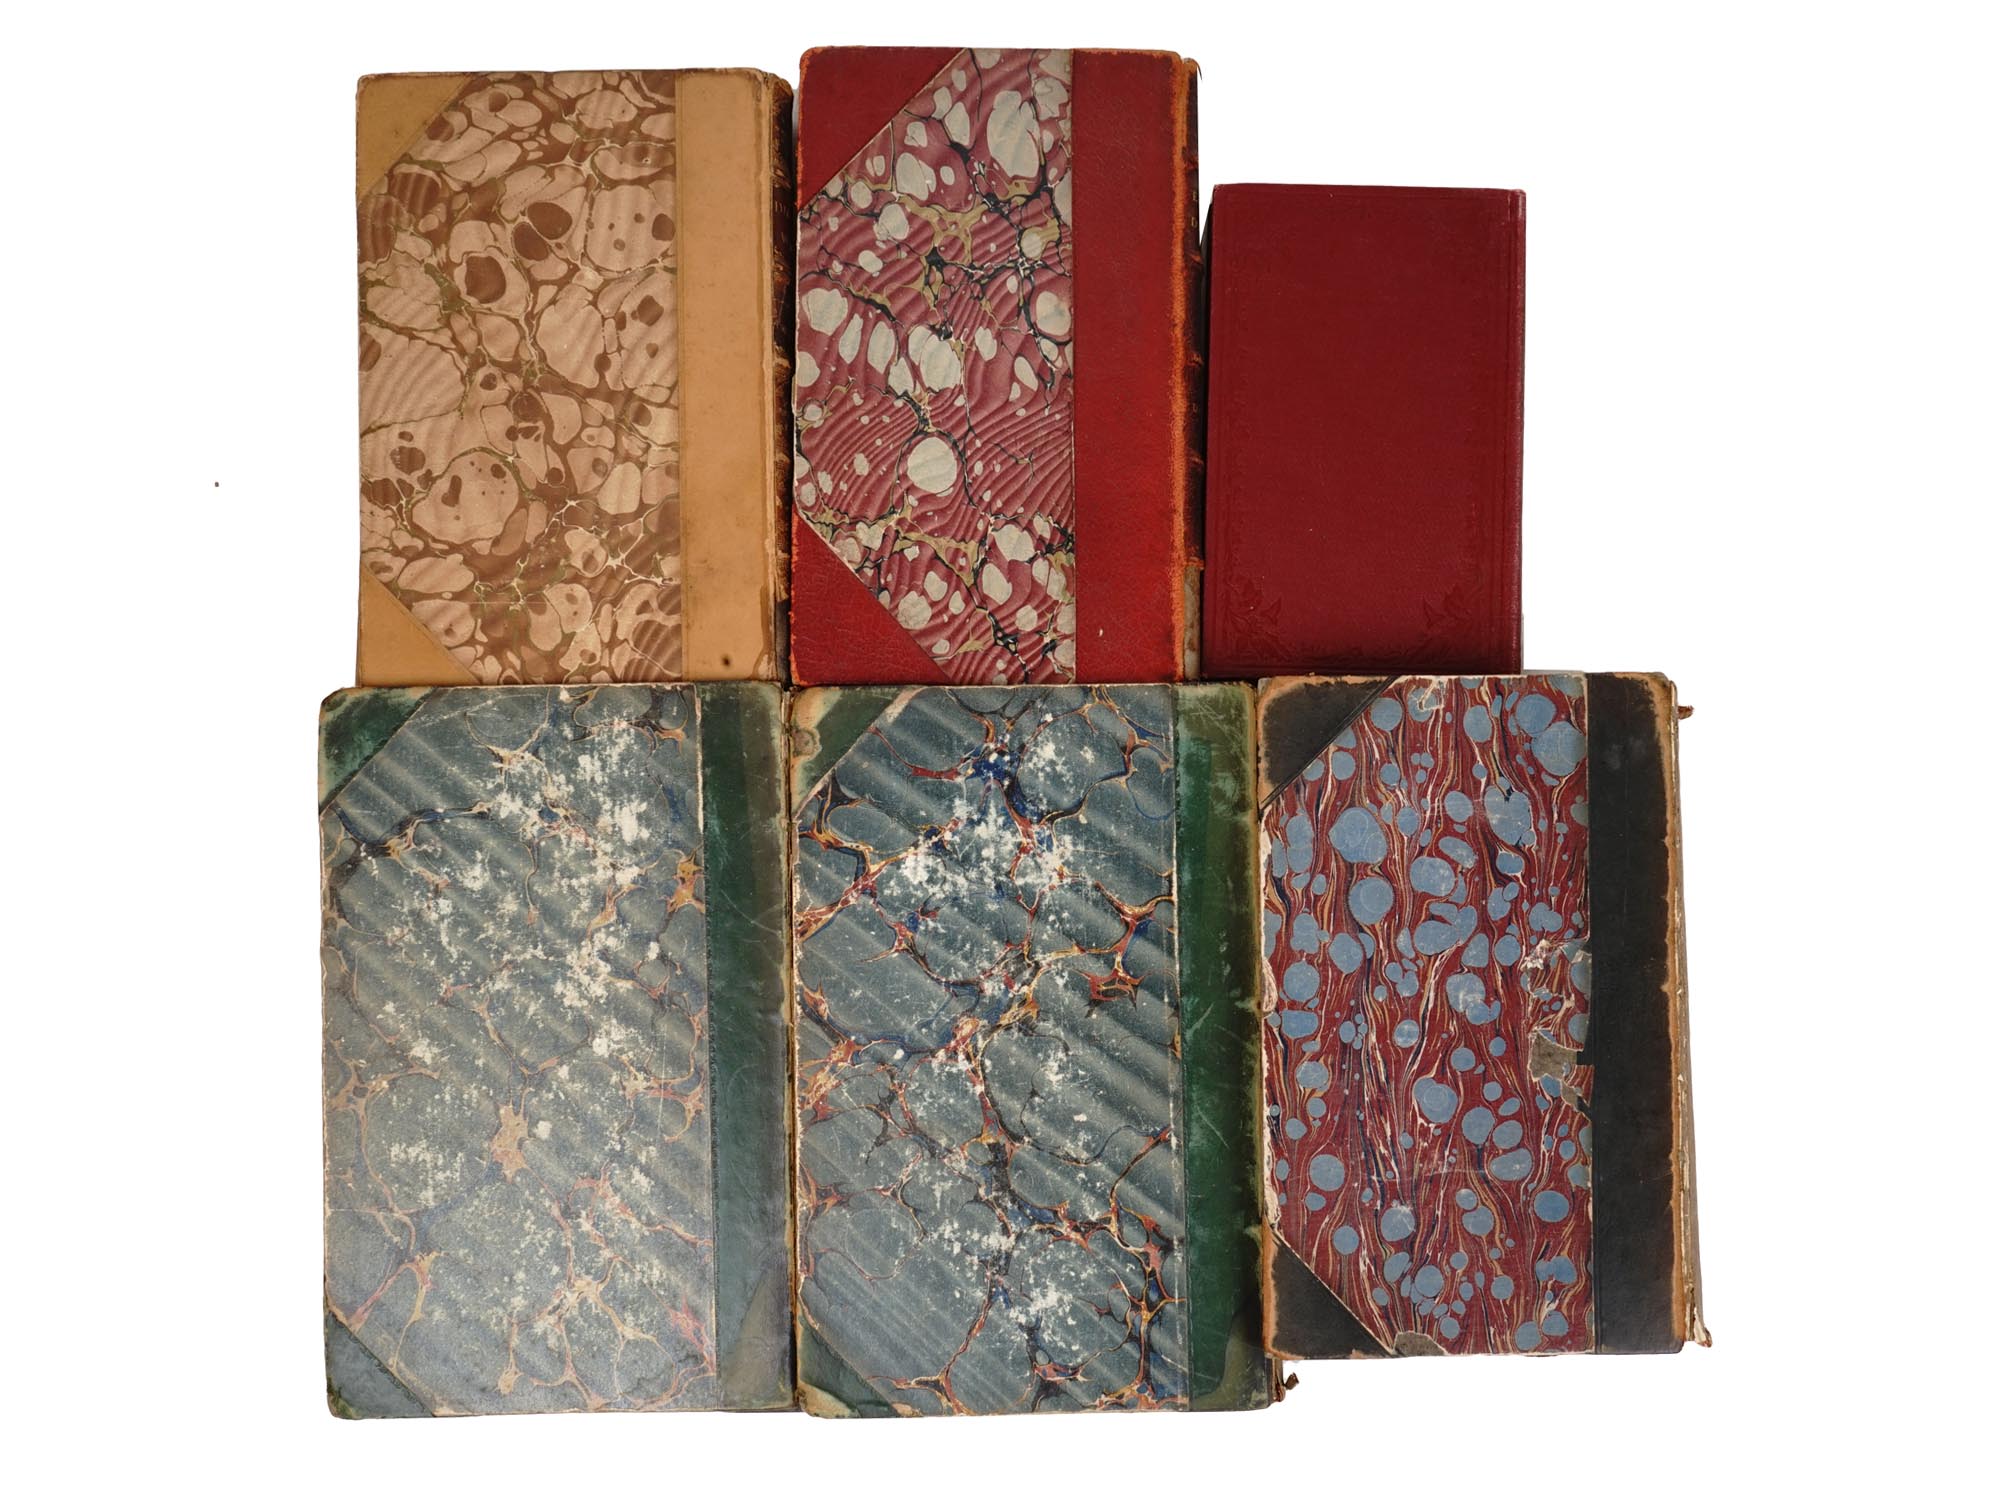 ANTIQUE CHARLES DICKENS BOOK EDITIONS PIC-1